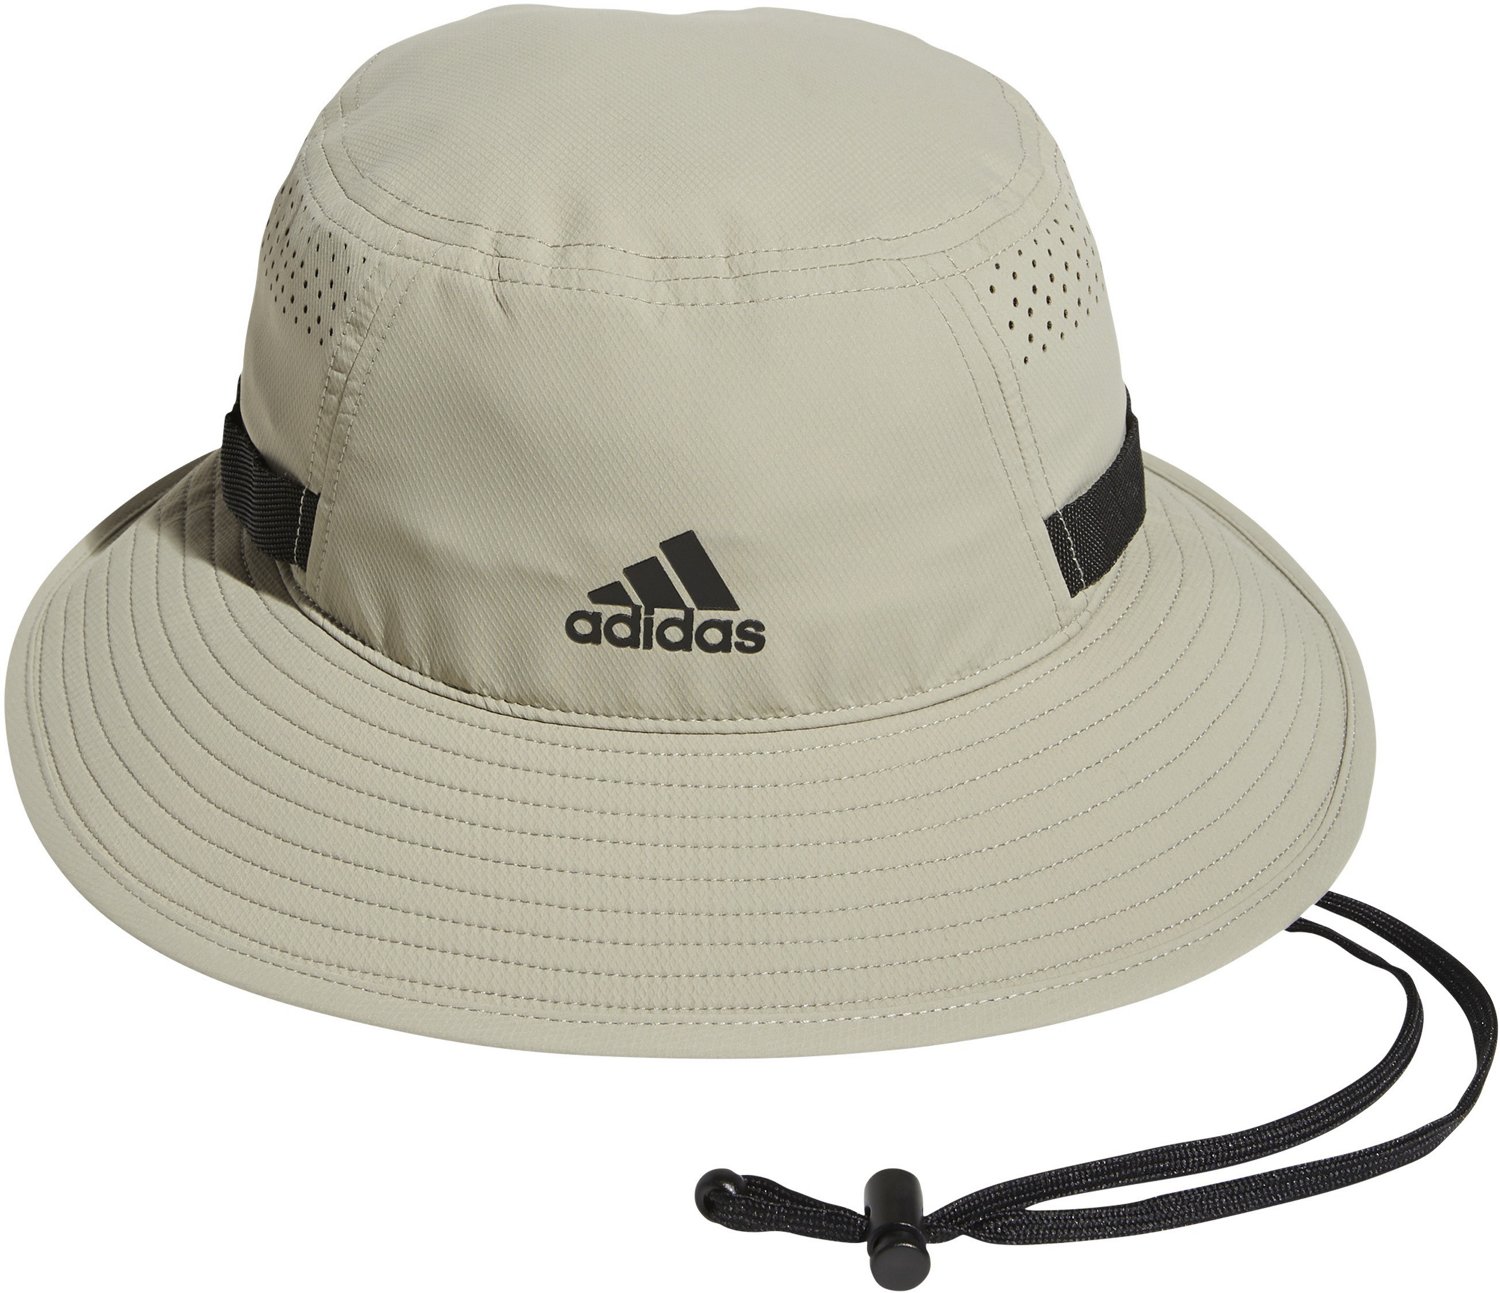 adidas Men's Victory 4 Bucket Hat | Free Shipping at Academy